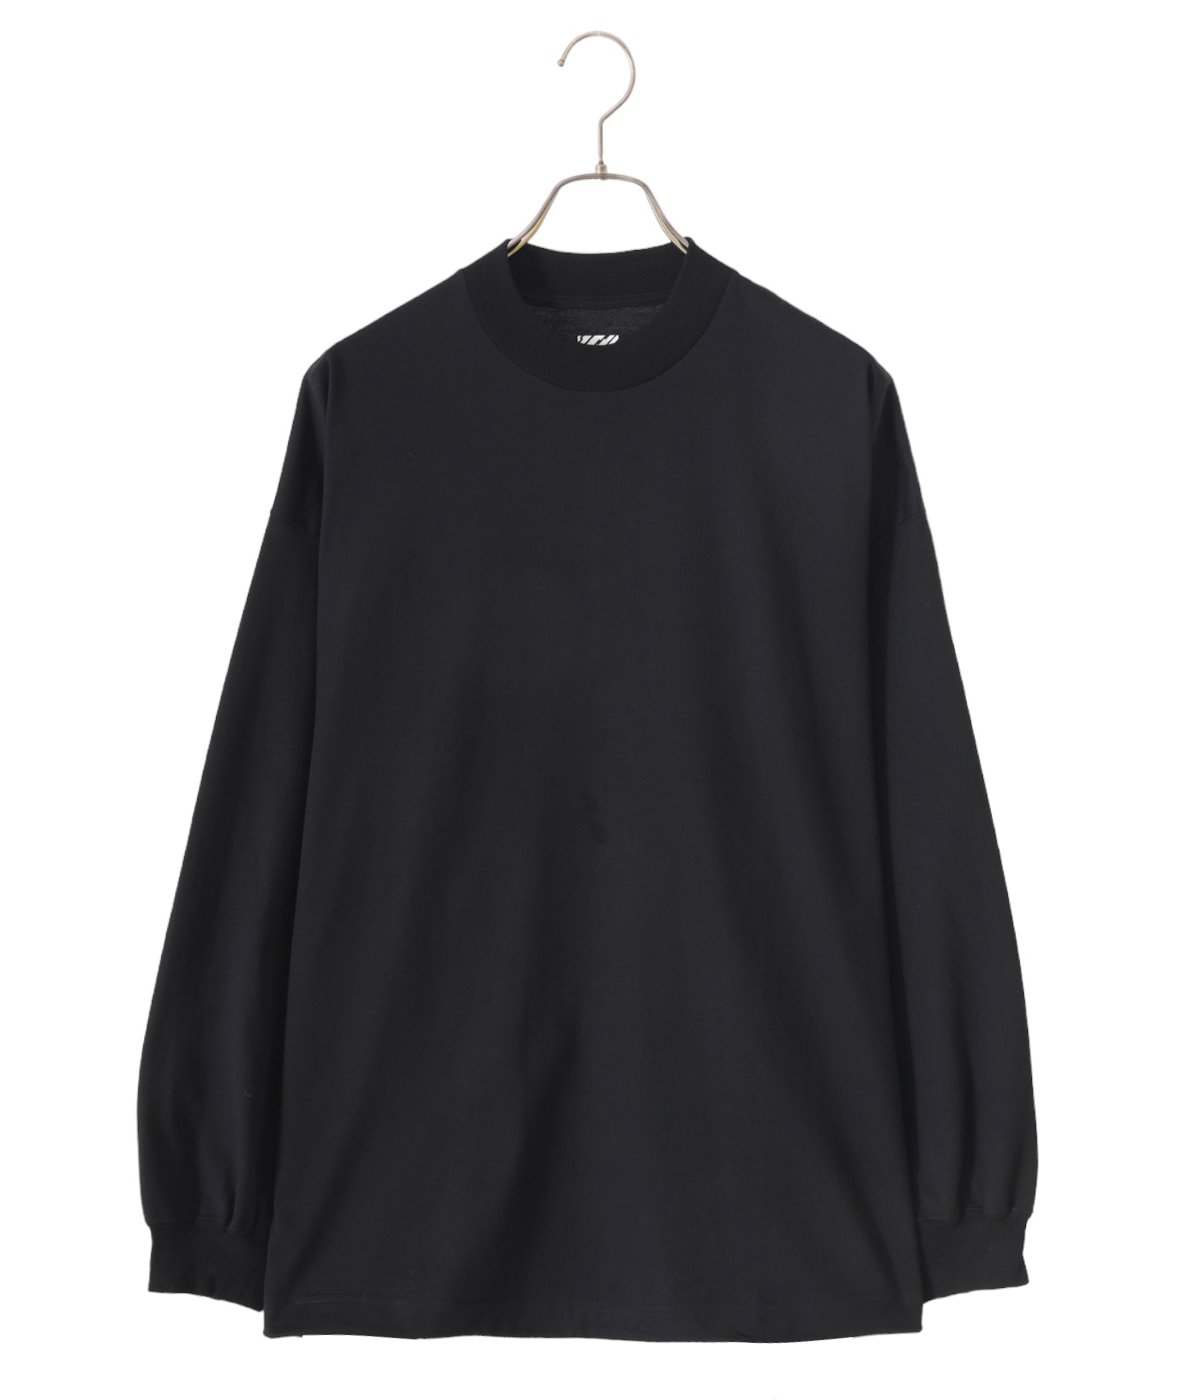 BALLOON LONG T SHIRT | is-ness(イズネス) / トップス カットソー長袖 